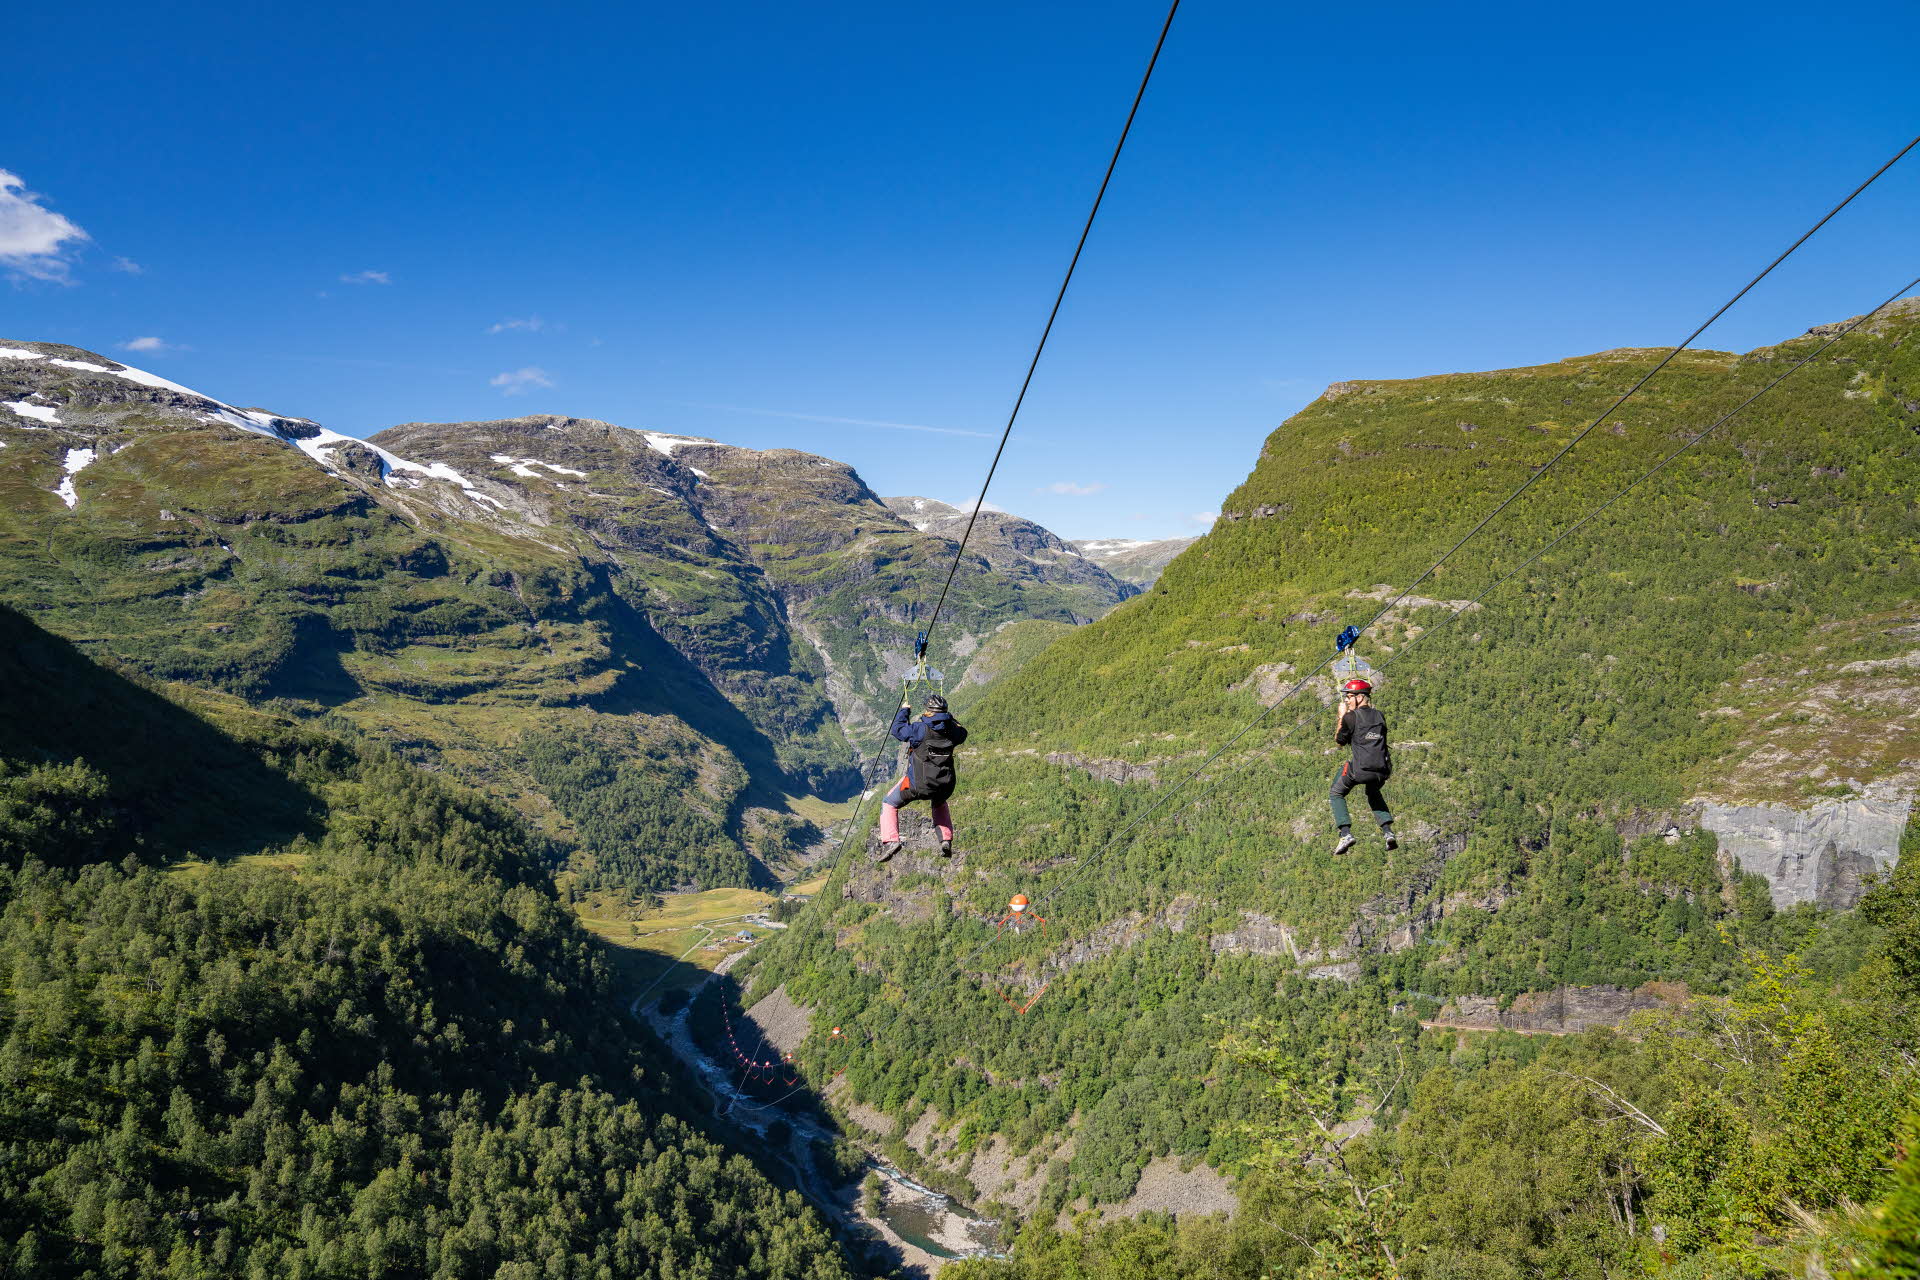 Two people on their way down the Flåm Zipline. A valley with a green forest, river and surrounding mountains. 